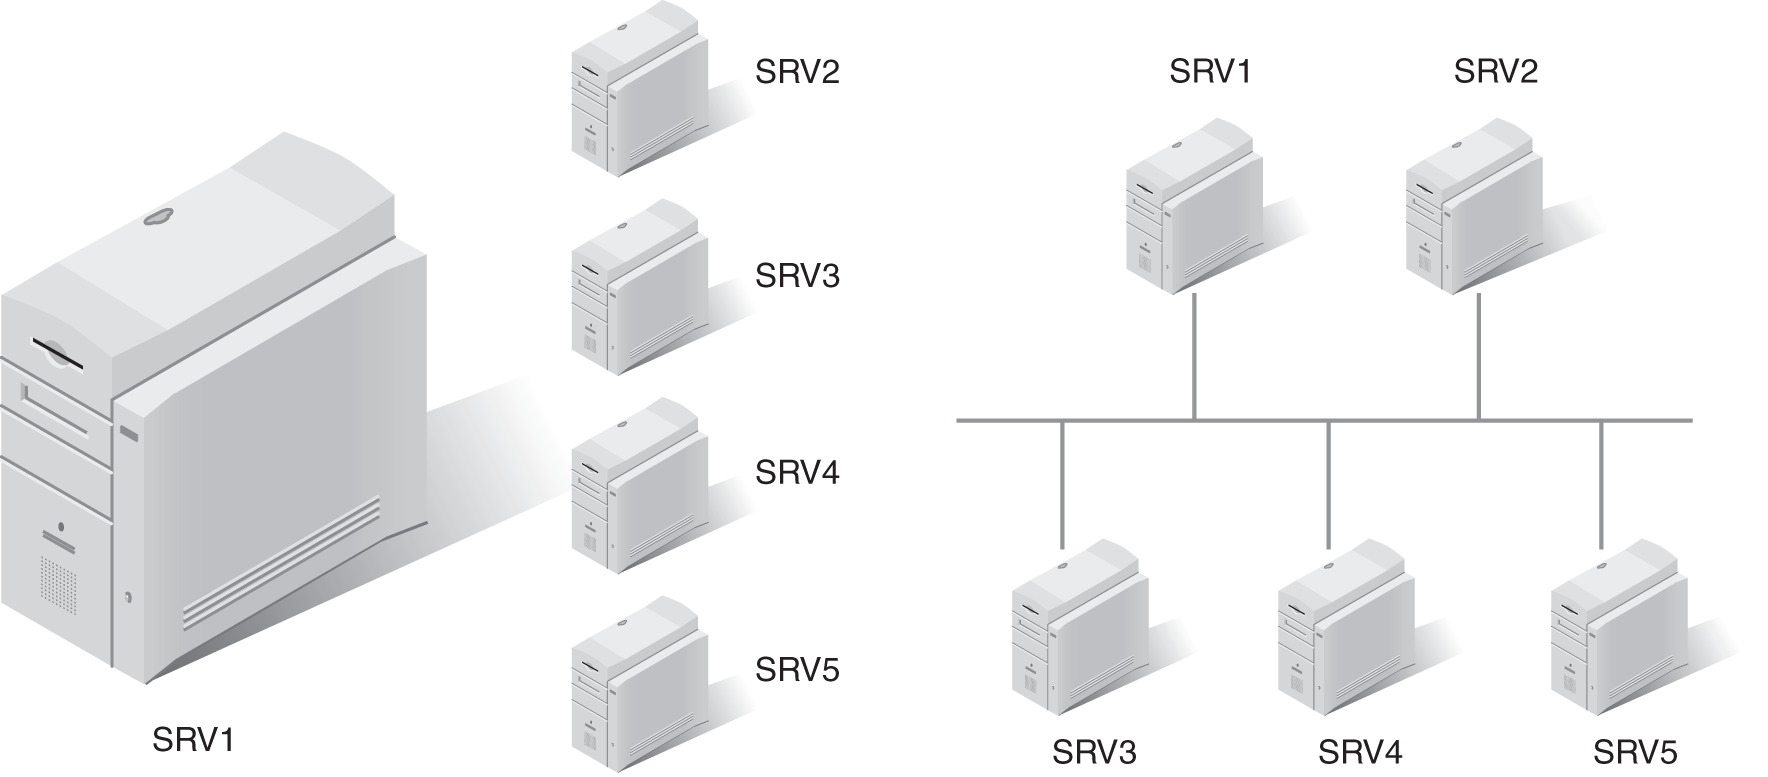 A network diagram of one physical server that is hosting four virtual servers.